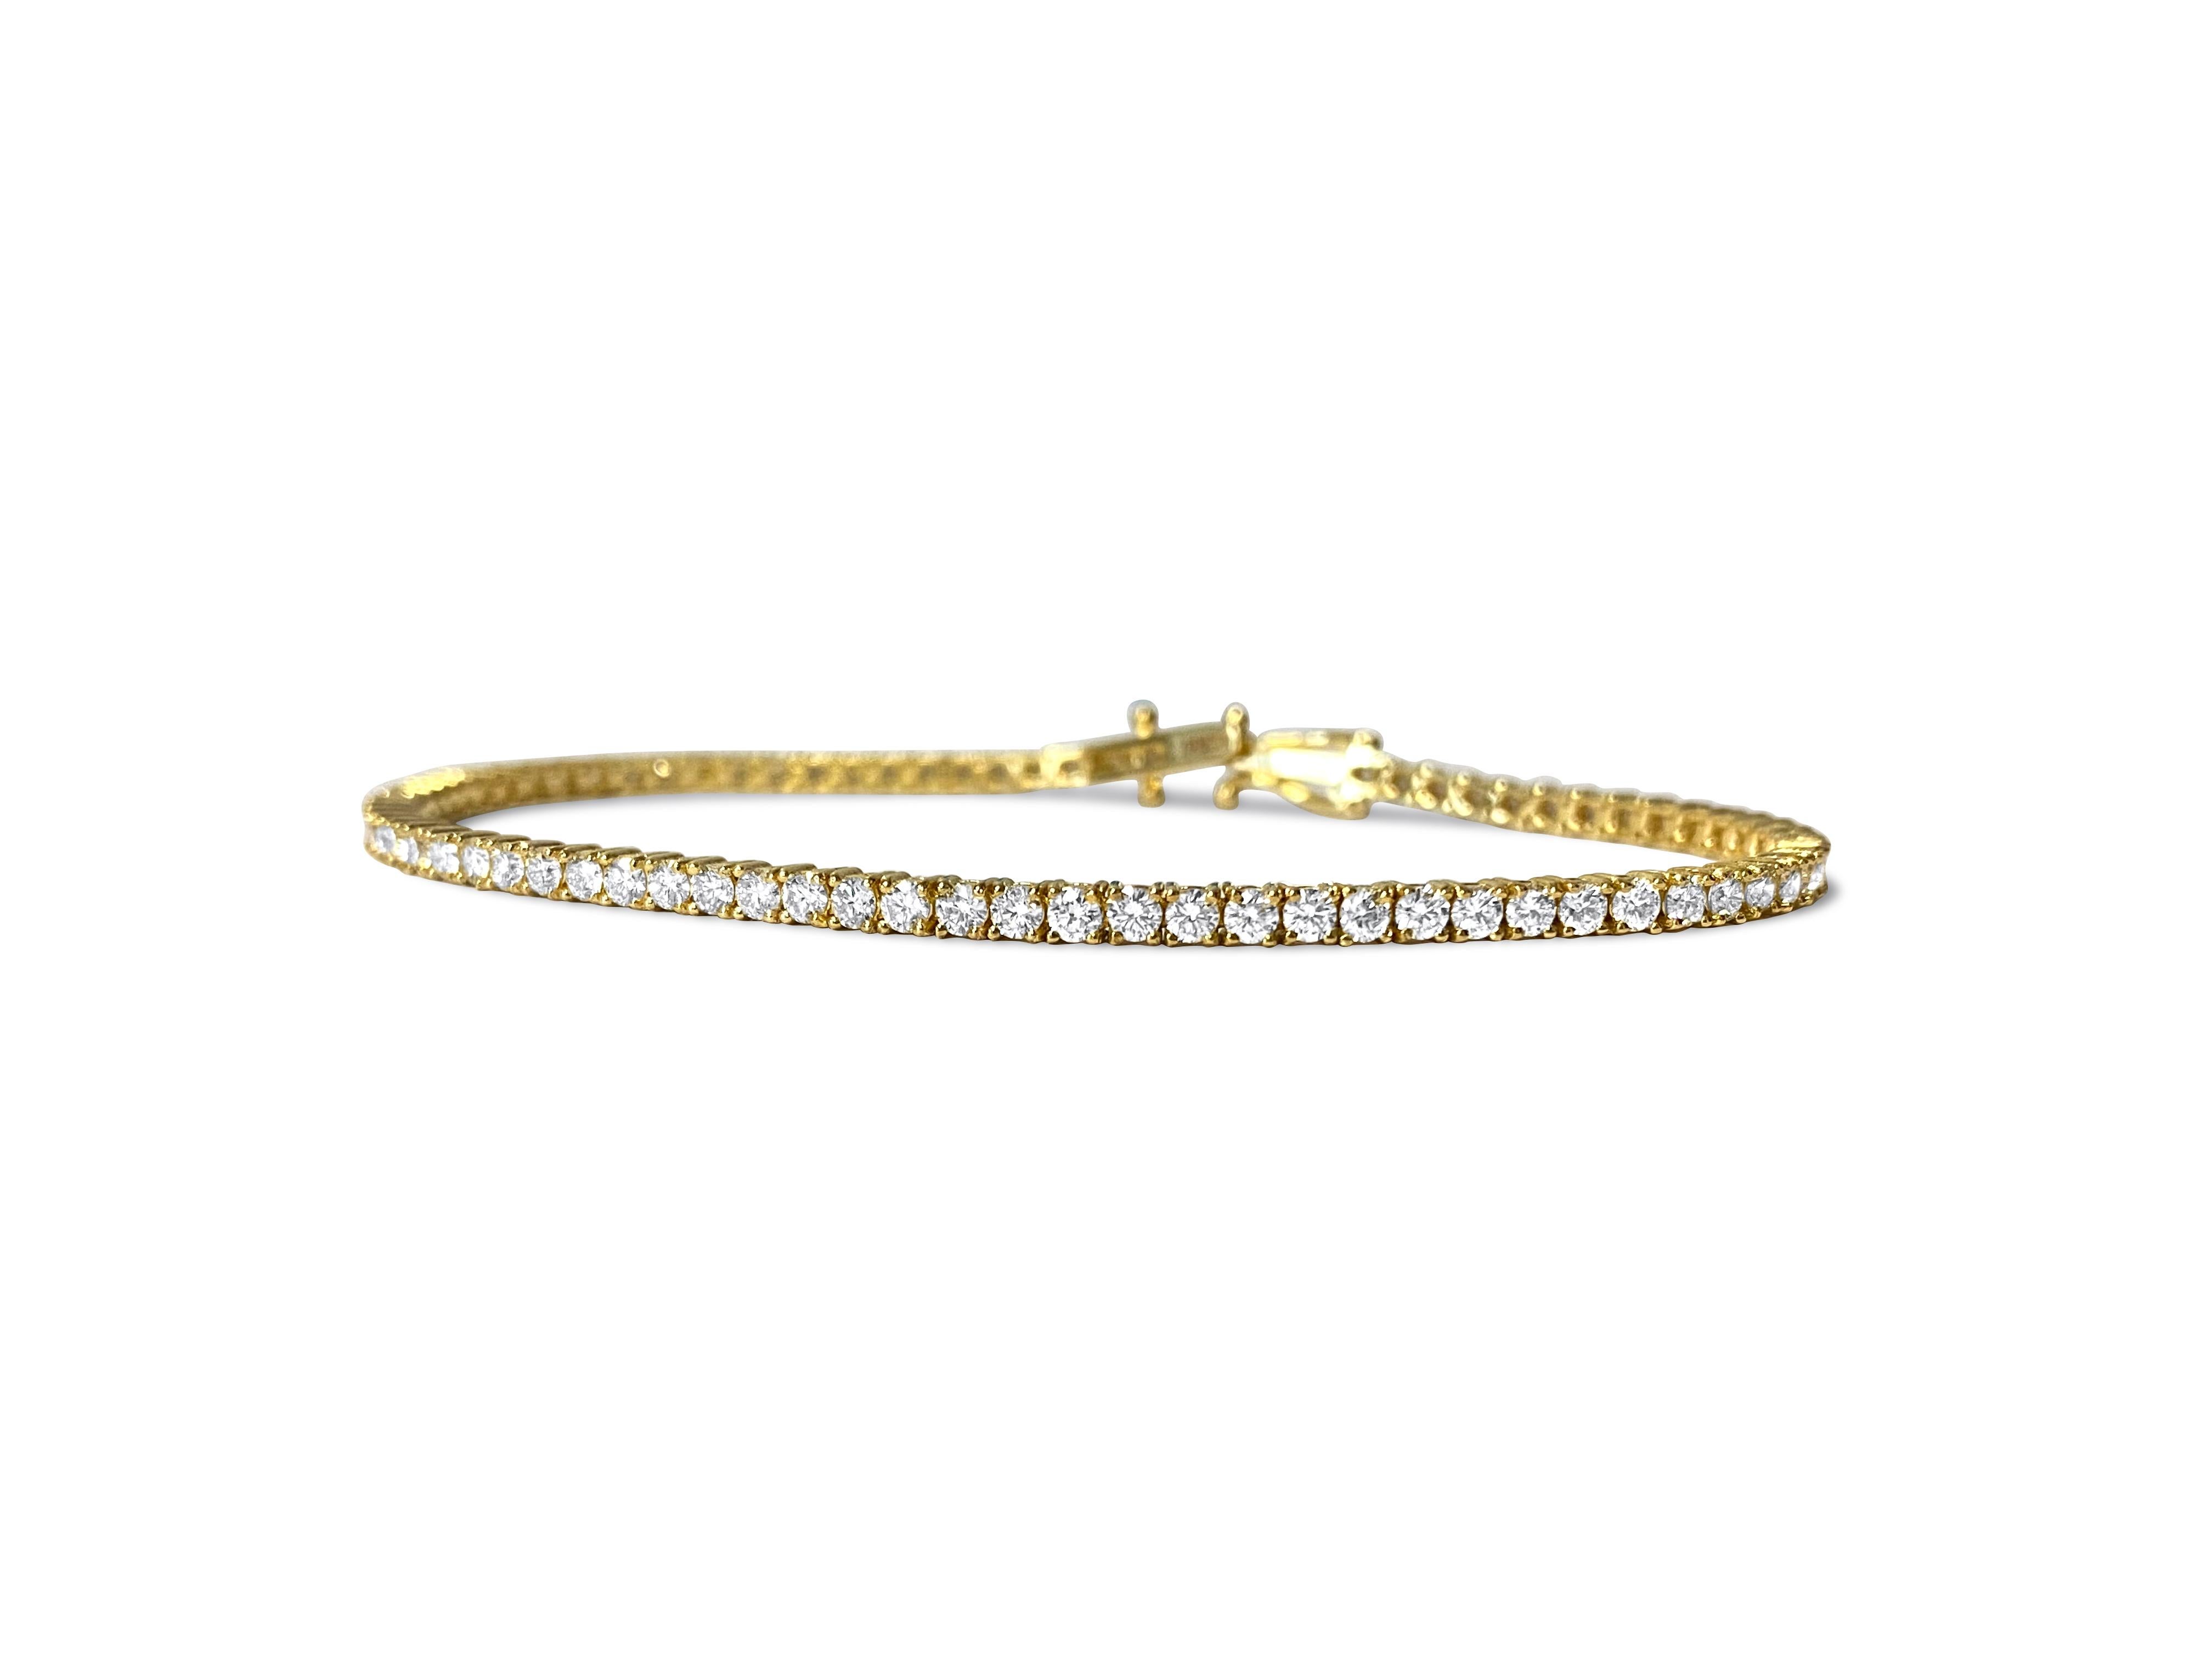 Metal: 10k yellow gold. 
Diamonds: 4.00cwt. VVS clarity. H color. 
100% natural earth mined diamonds. Round brilliant cut set in prongs. 
Gorgeous finish and shine. Top of the line diamond tennis bracelet.